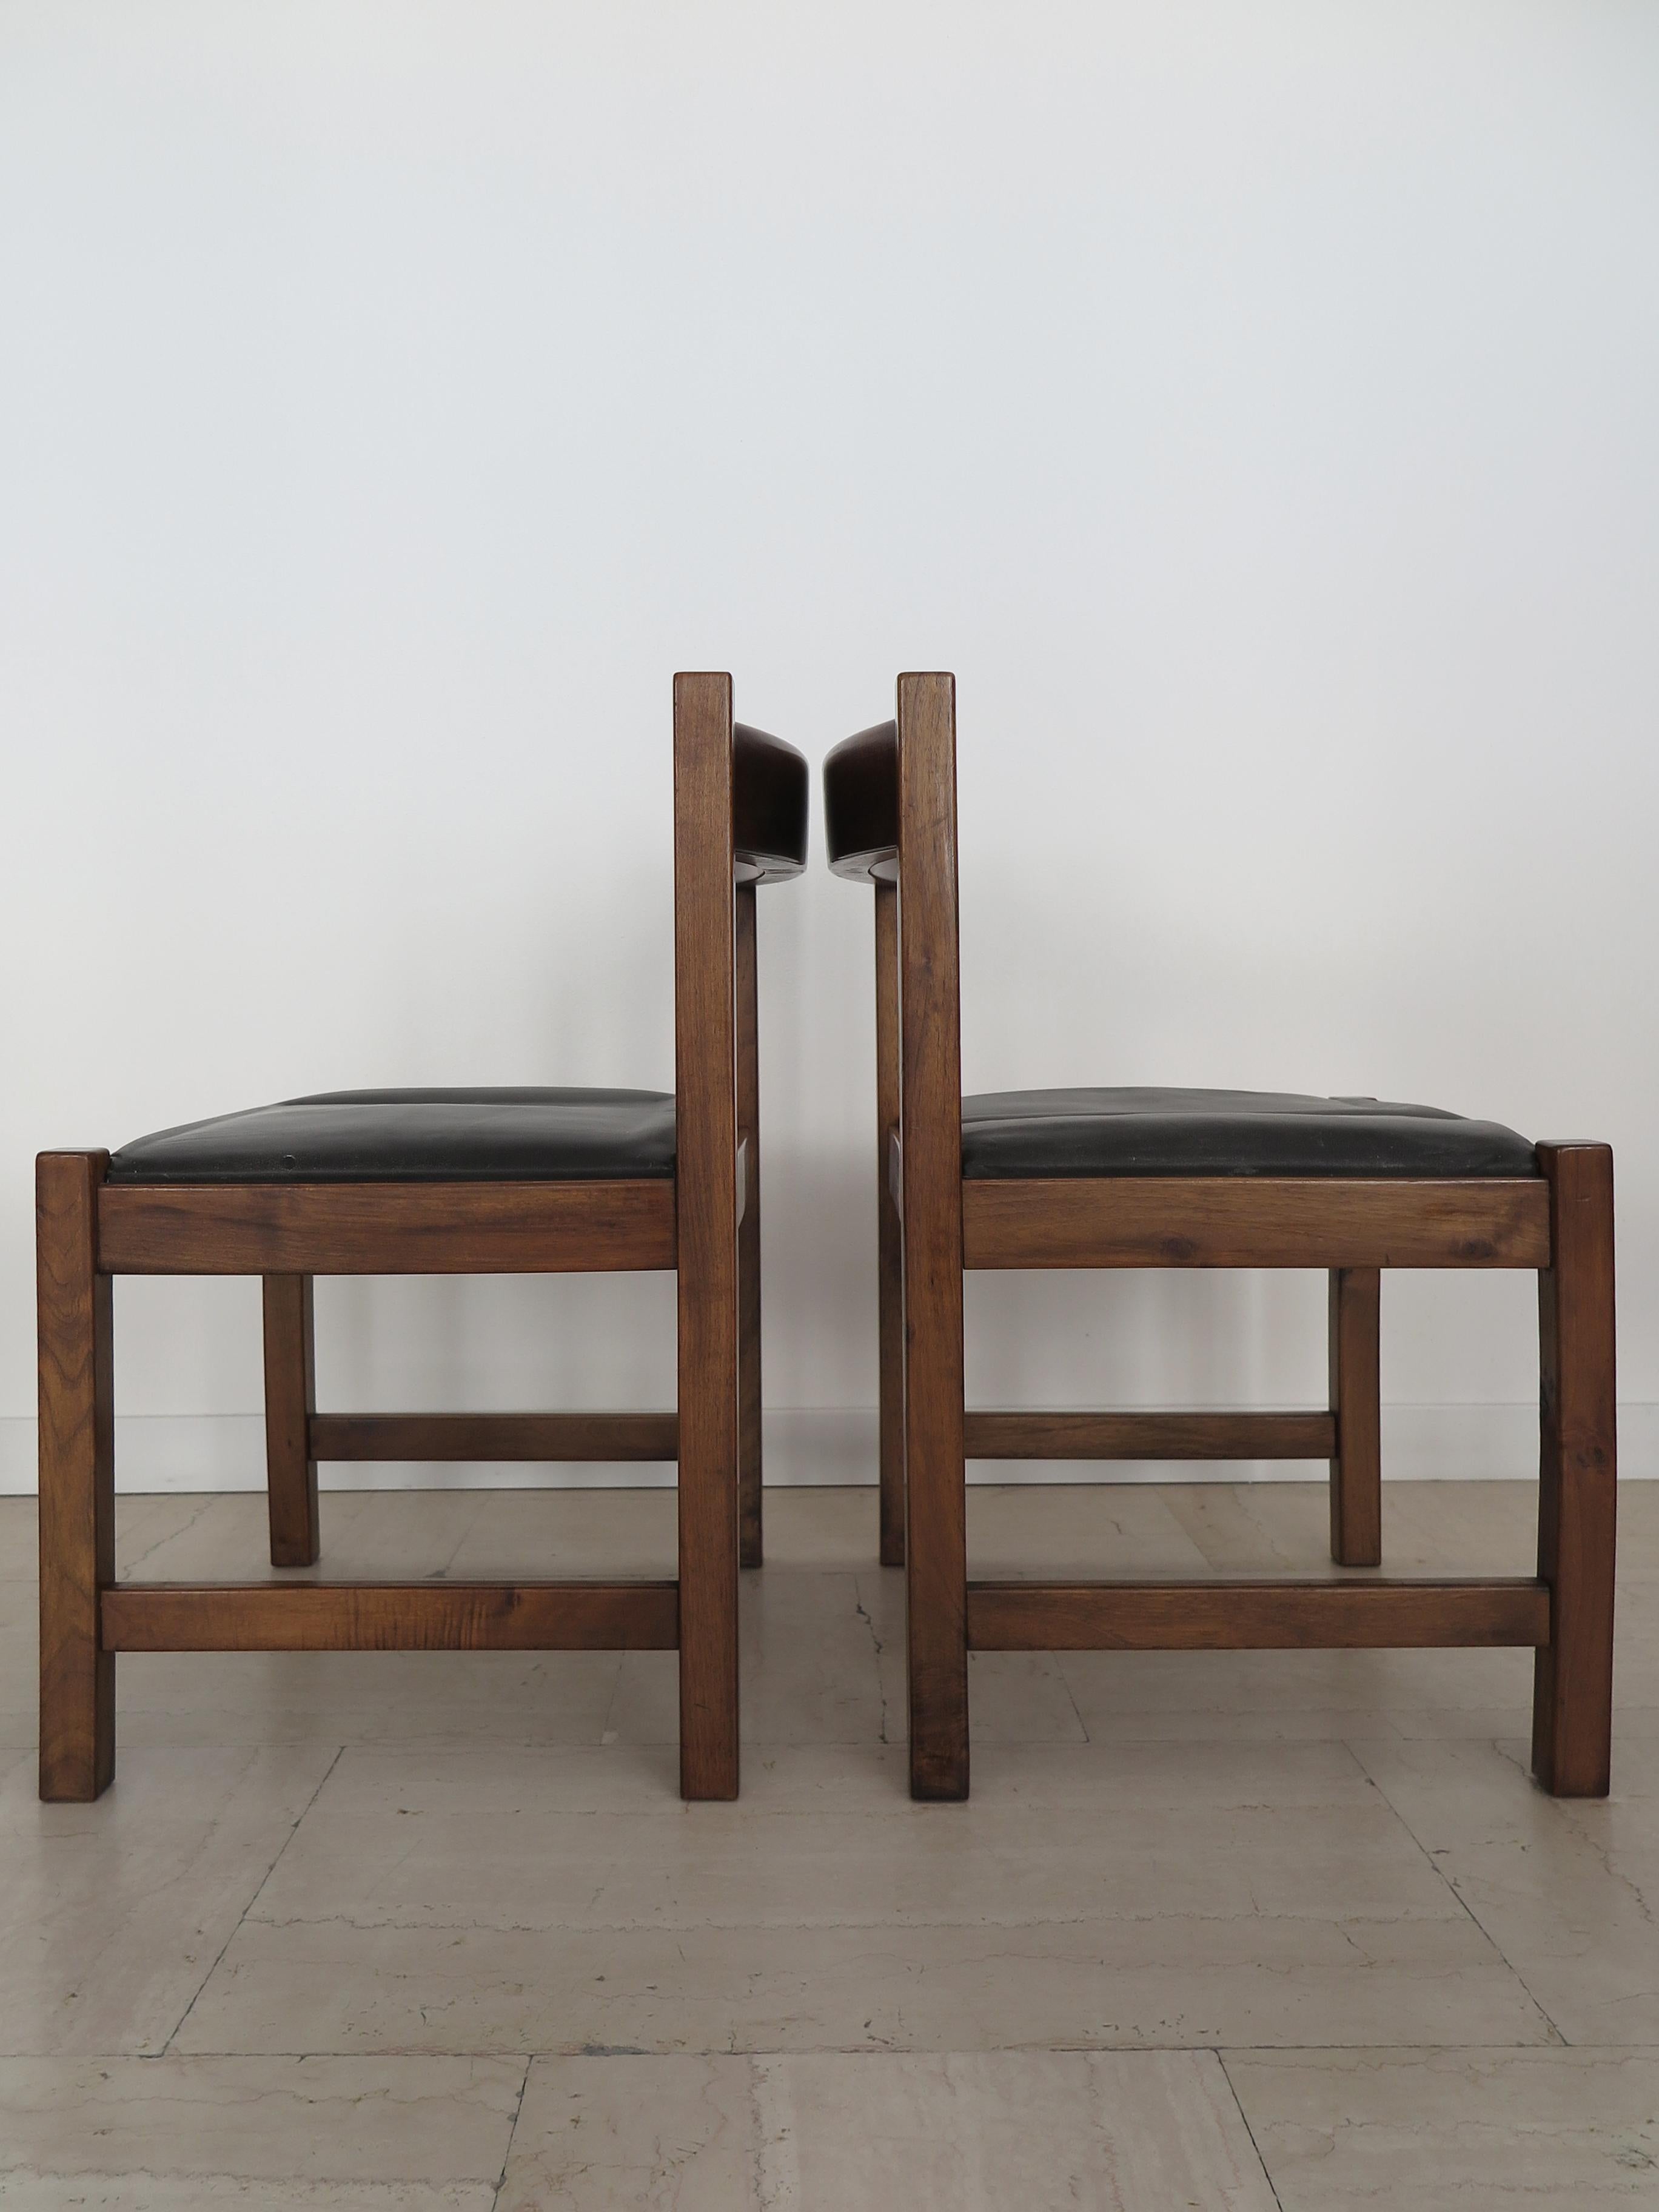 G. Michelucci for Poltronova Italian Midcentury Wood Leather Dining Chairs 1960s For Sale 1